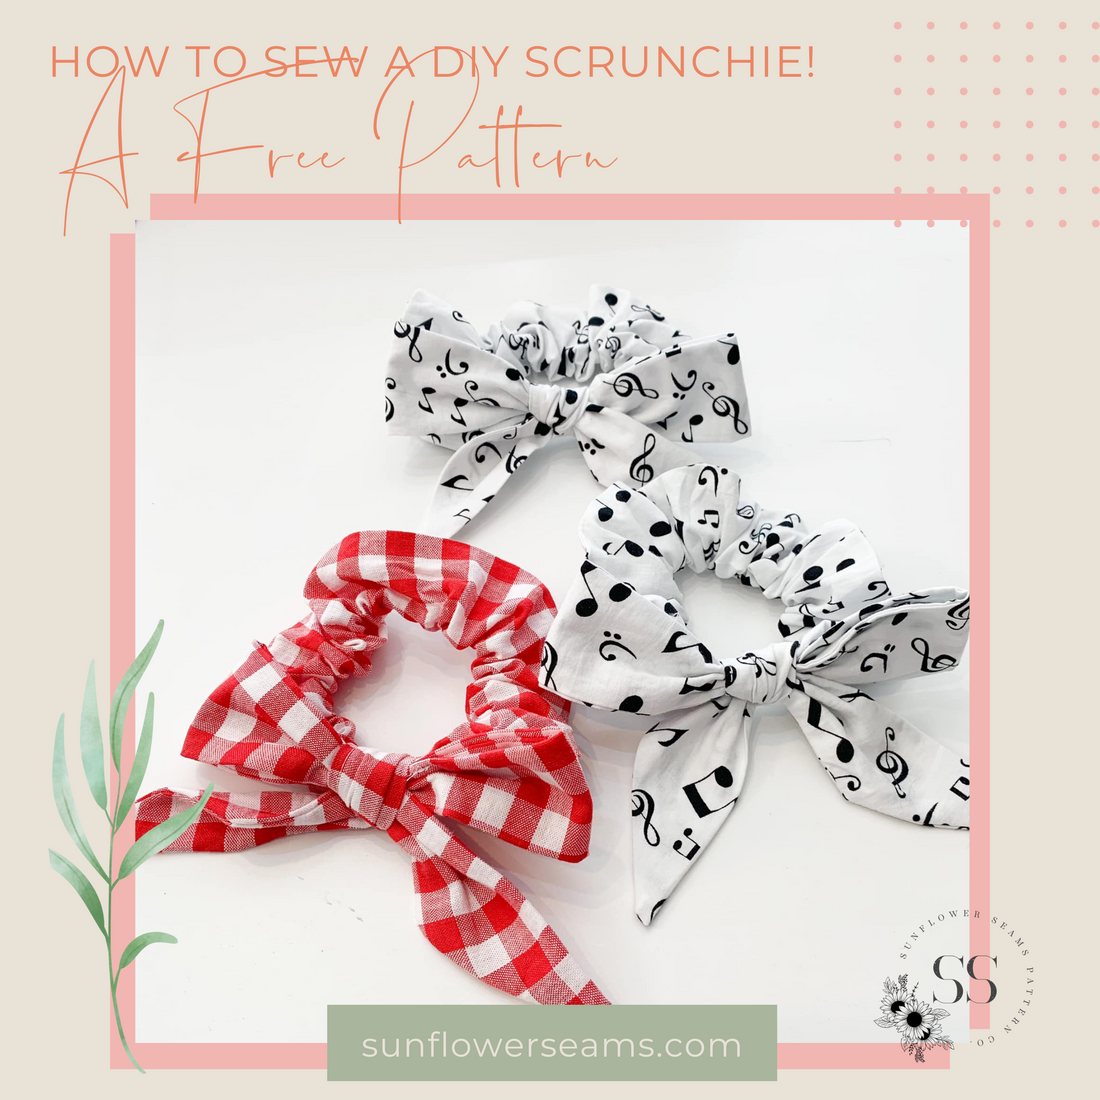 How to sew a DIY Scrunchie! {A FREE Pattern}